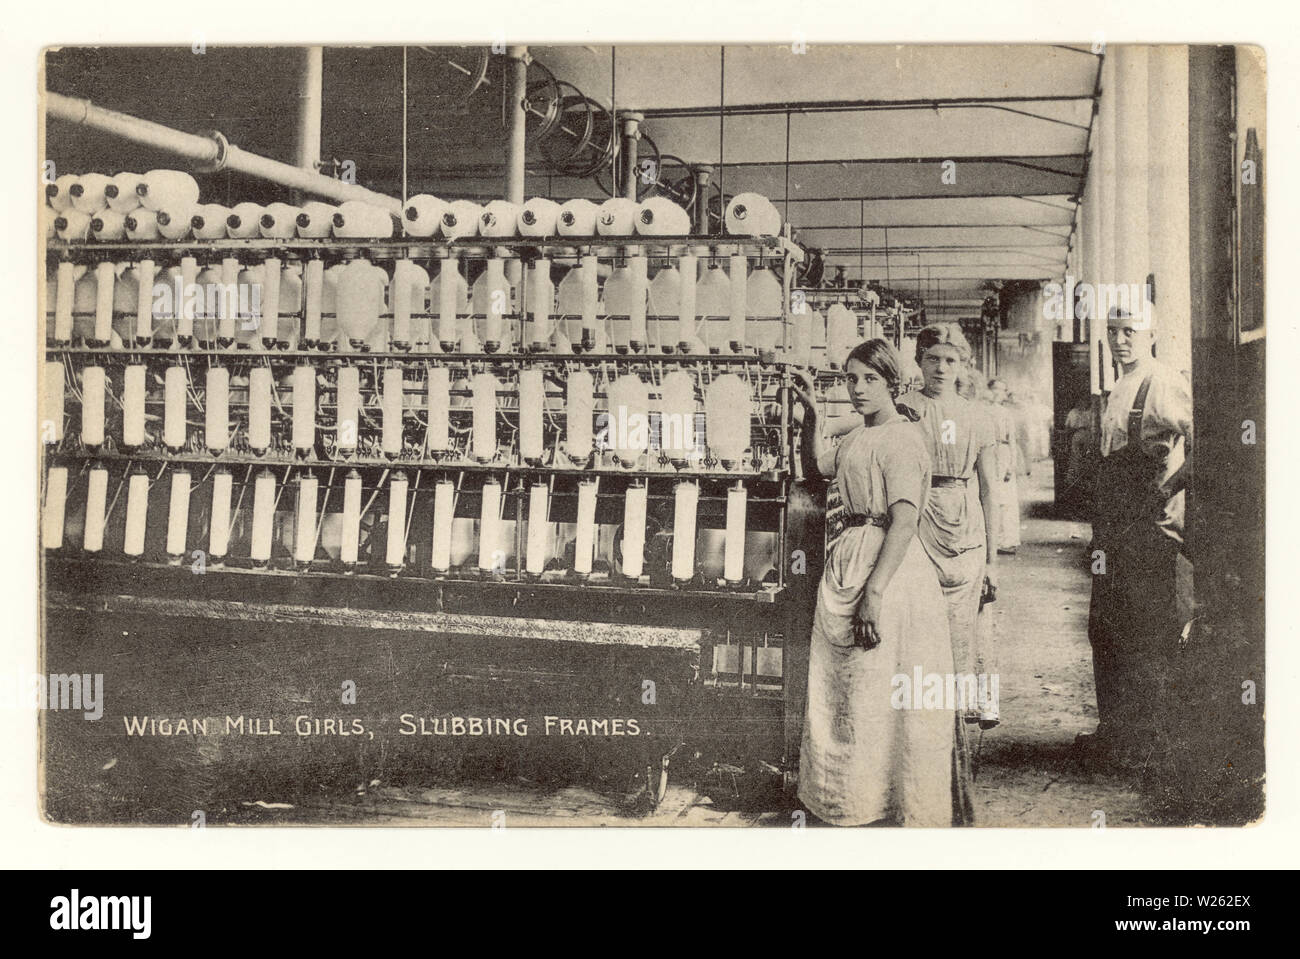 Early postcard printed at bottom is  "Wigan Mill girls,slubbing frames", with overseer / foreman standing beside slubbing frames - a machine used to straighten out the fibres in cotton prior to spinning 'Lancashire Lasses',  circa 1910, Wigan, Greater Manchester, U.K. Stock Photo